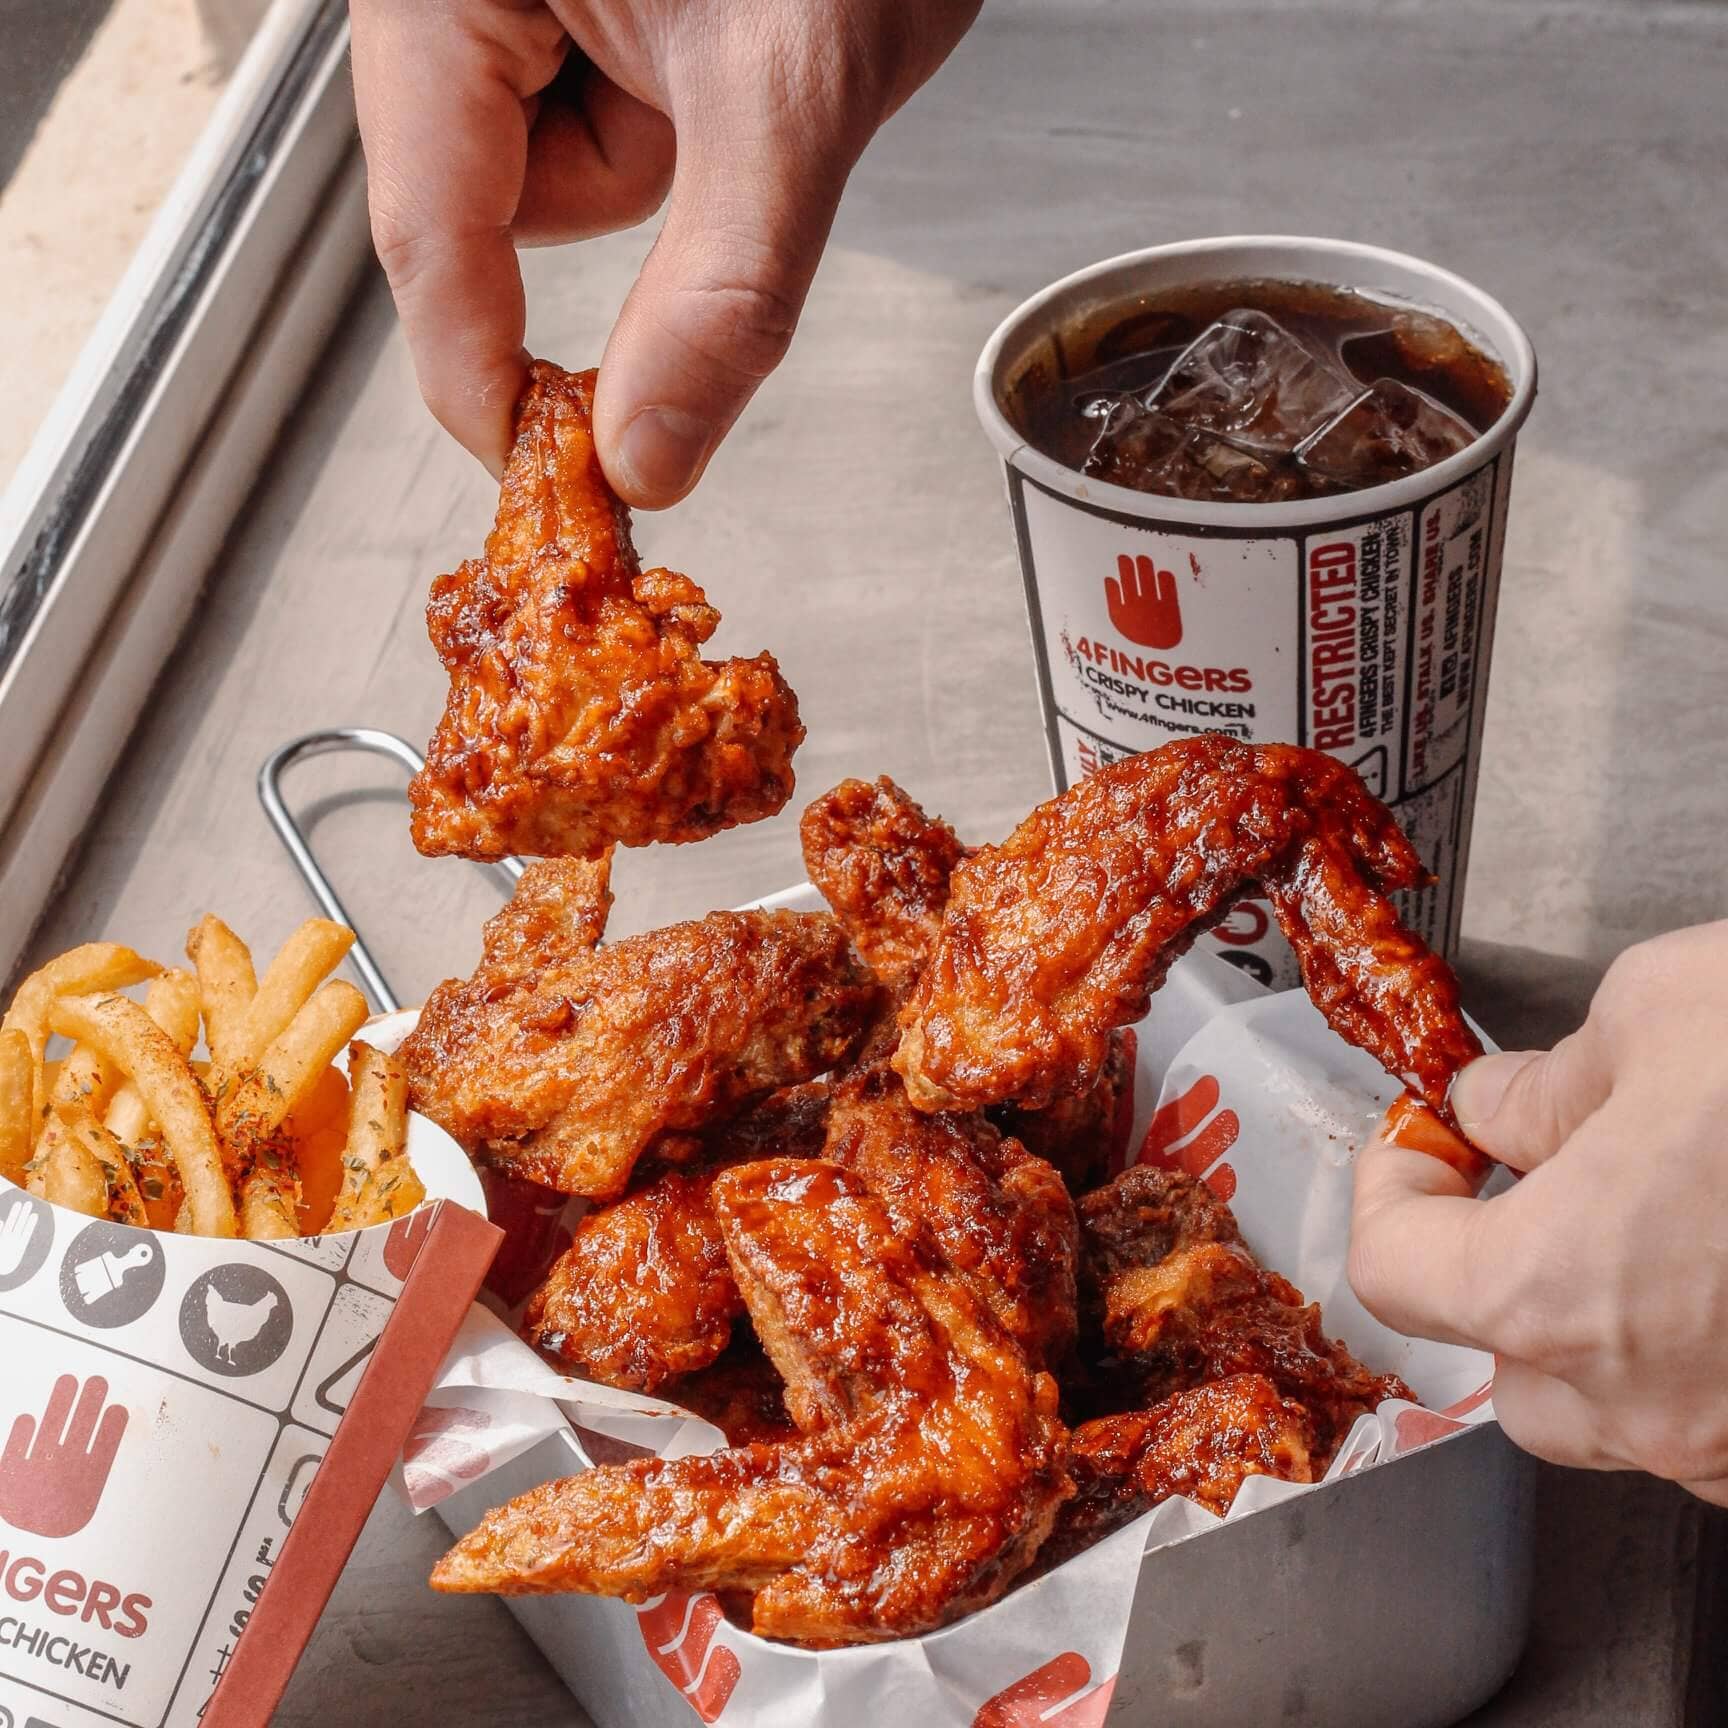 Eat all your life’s worries away with tender chicken wings from 4Fingers!